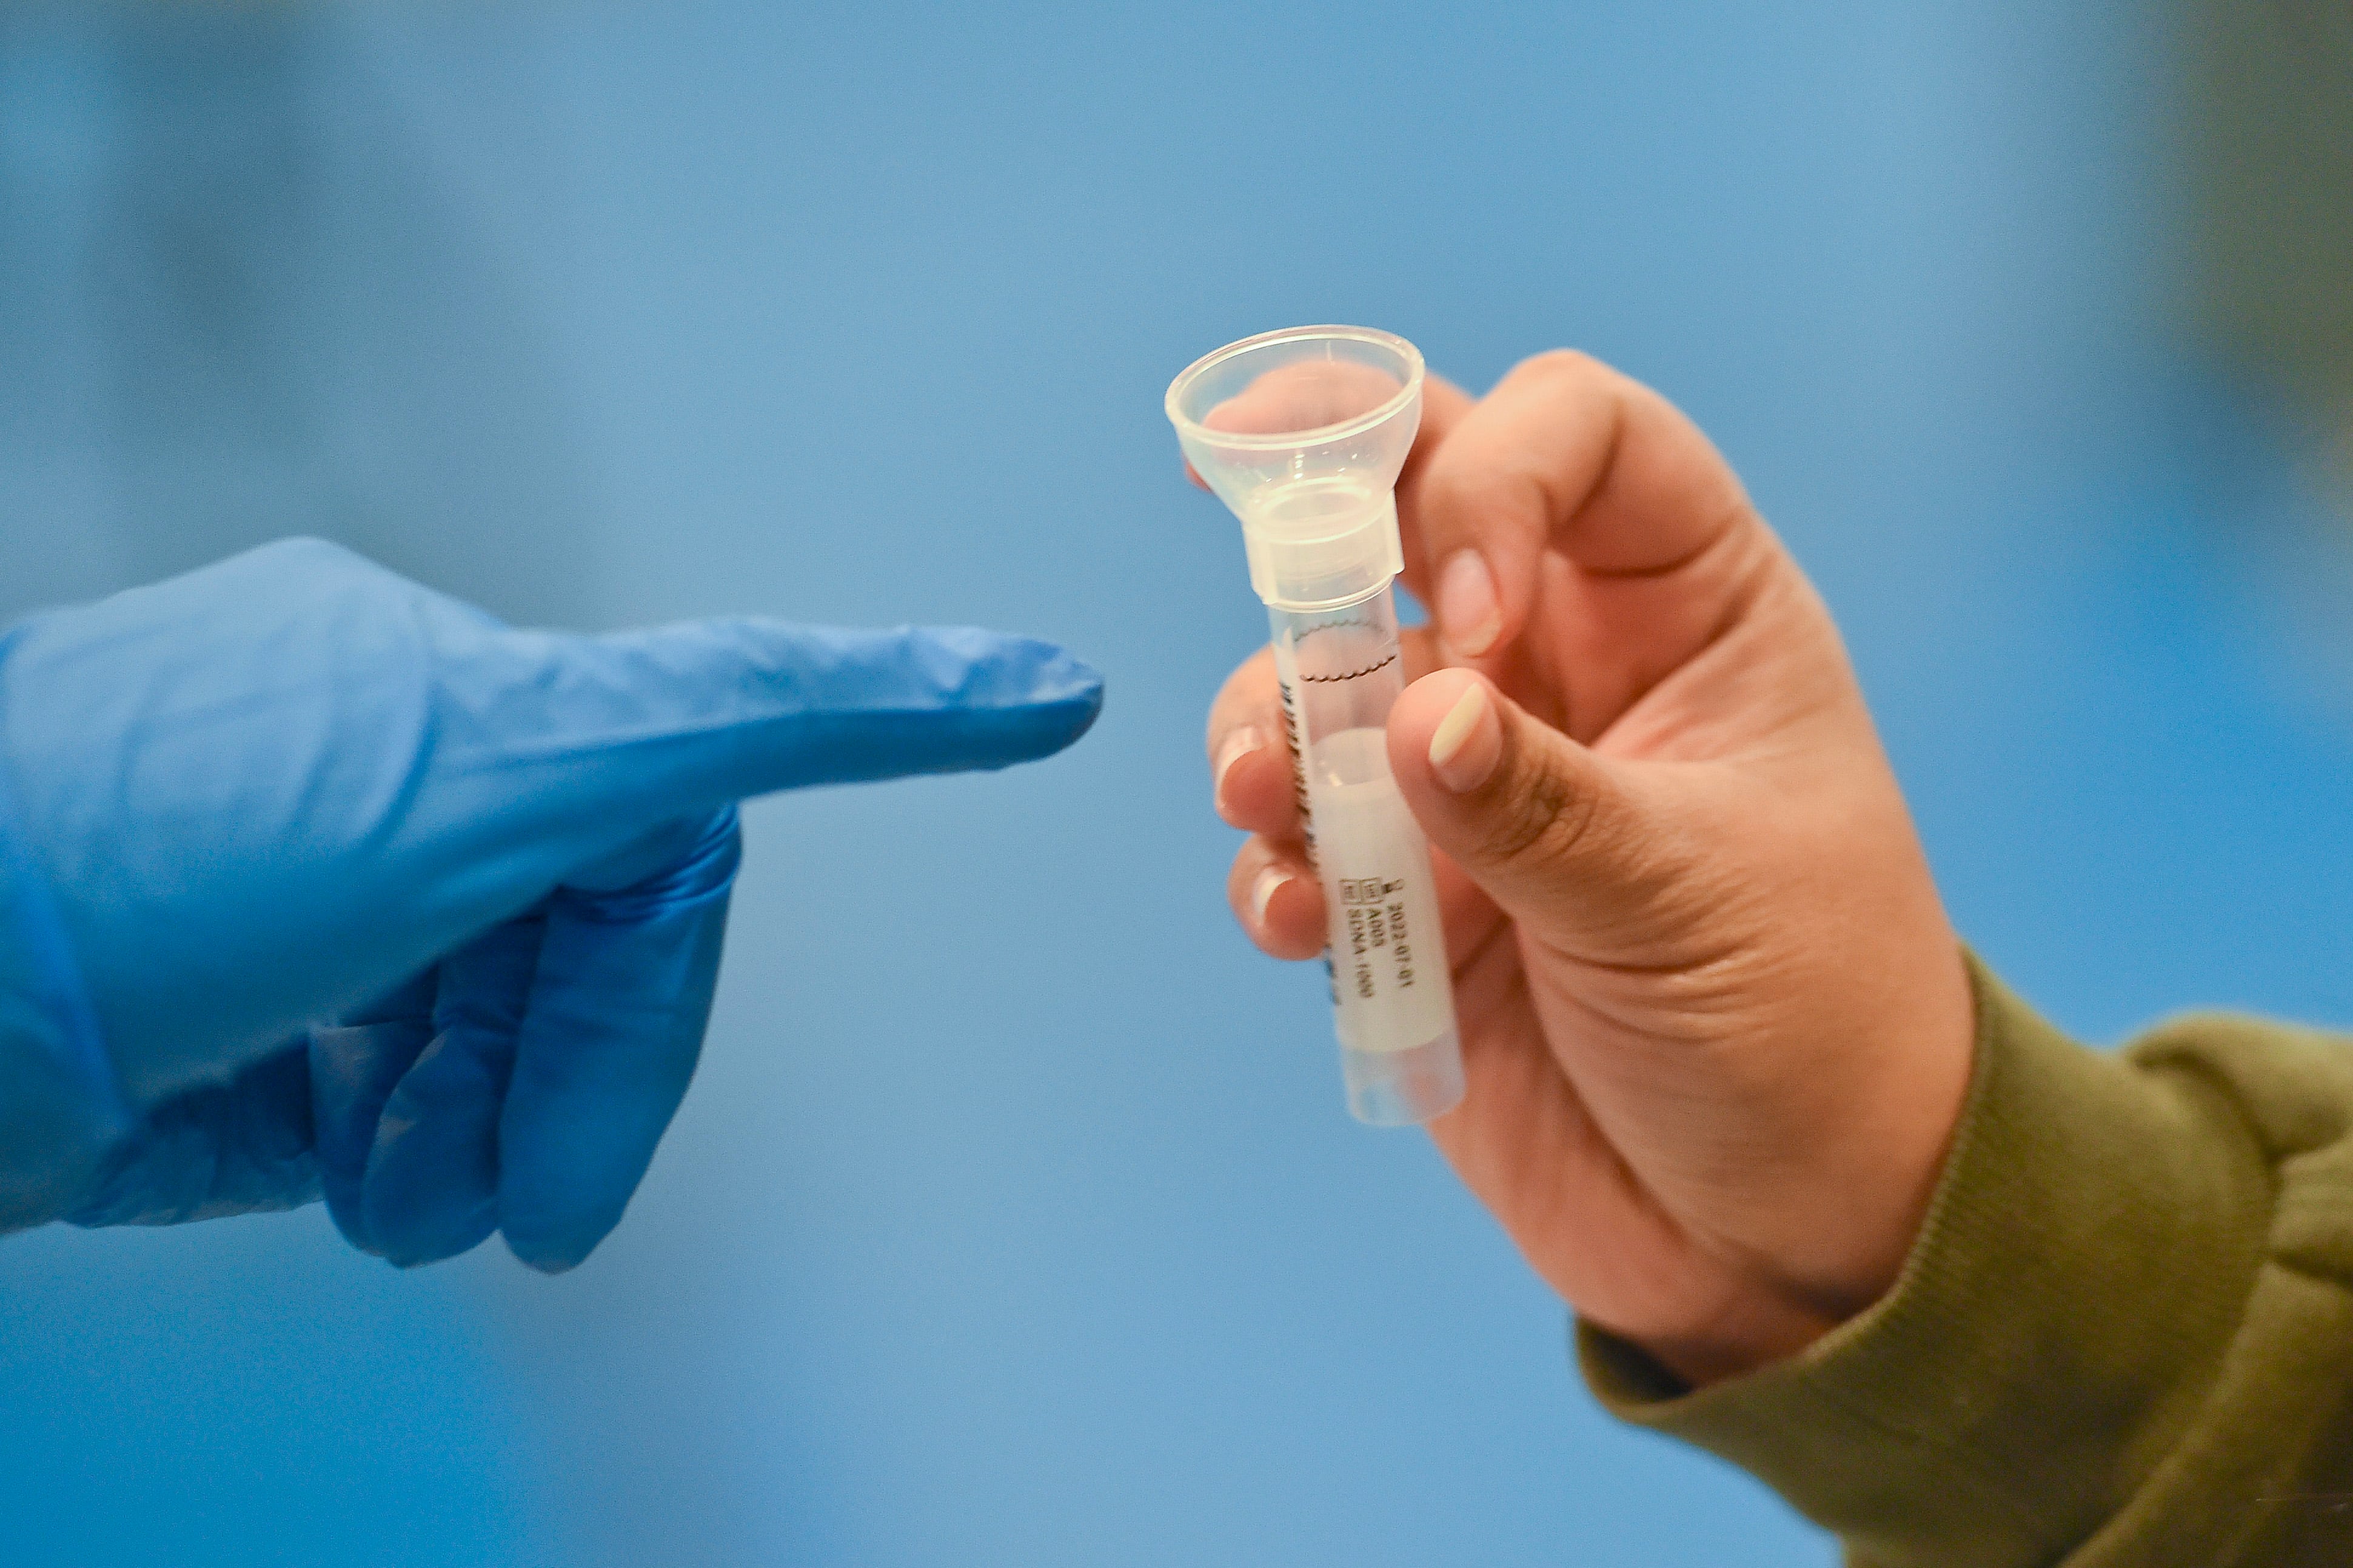 A hand with a blue latex glove points to a cylindrical saliva testing tube, used to detect COVID.